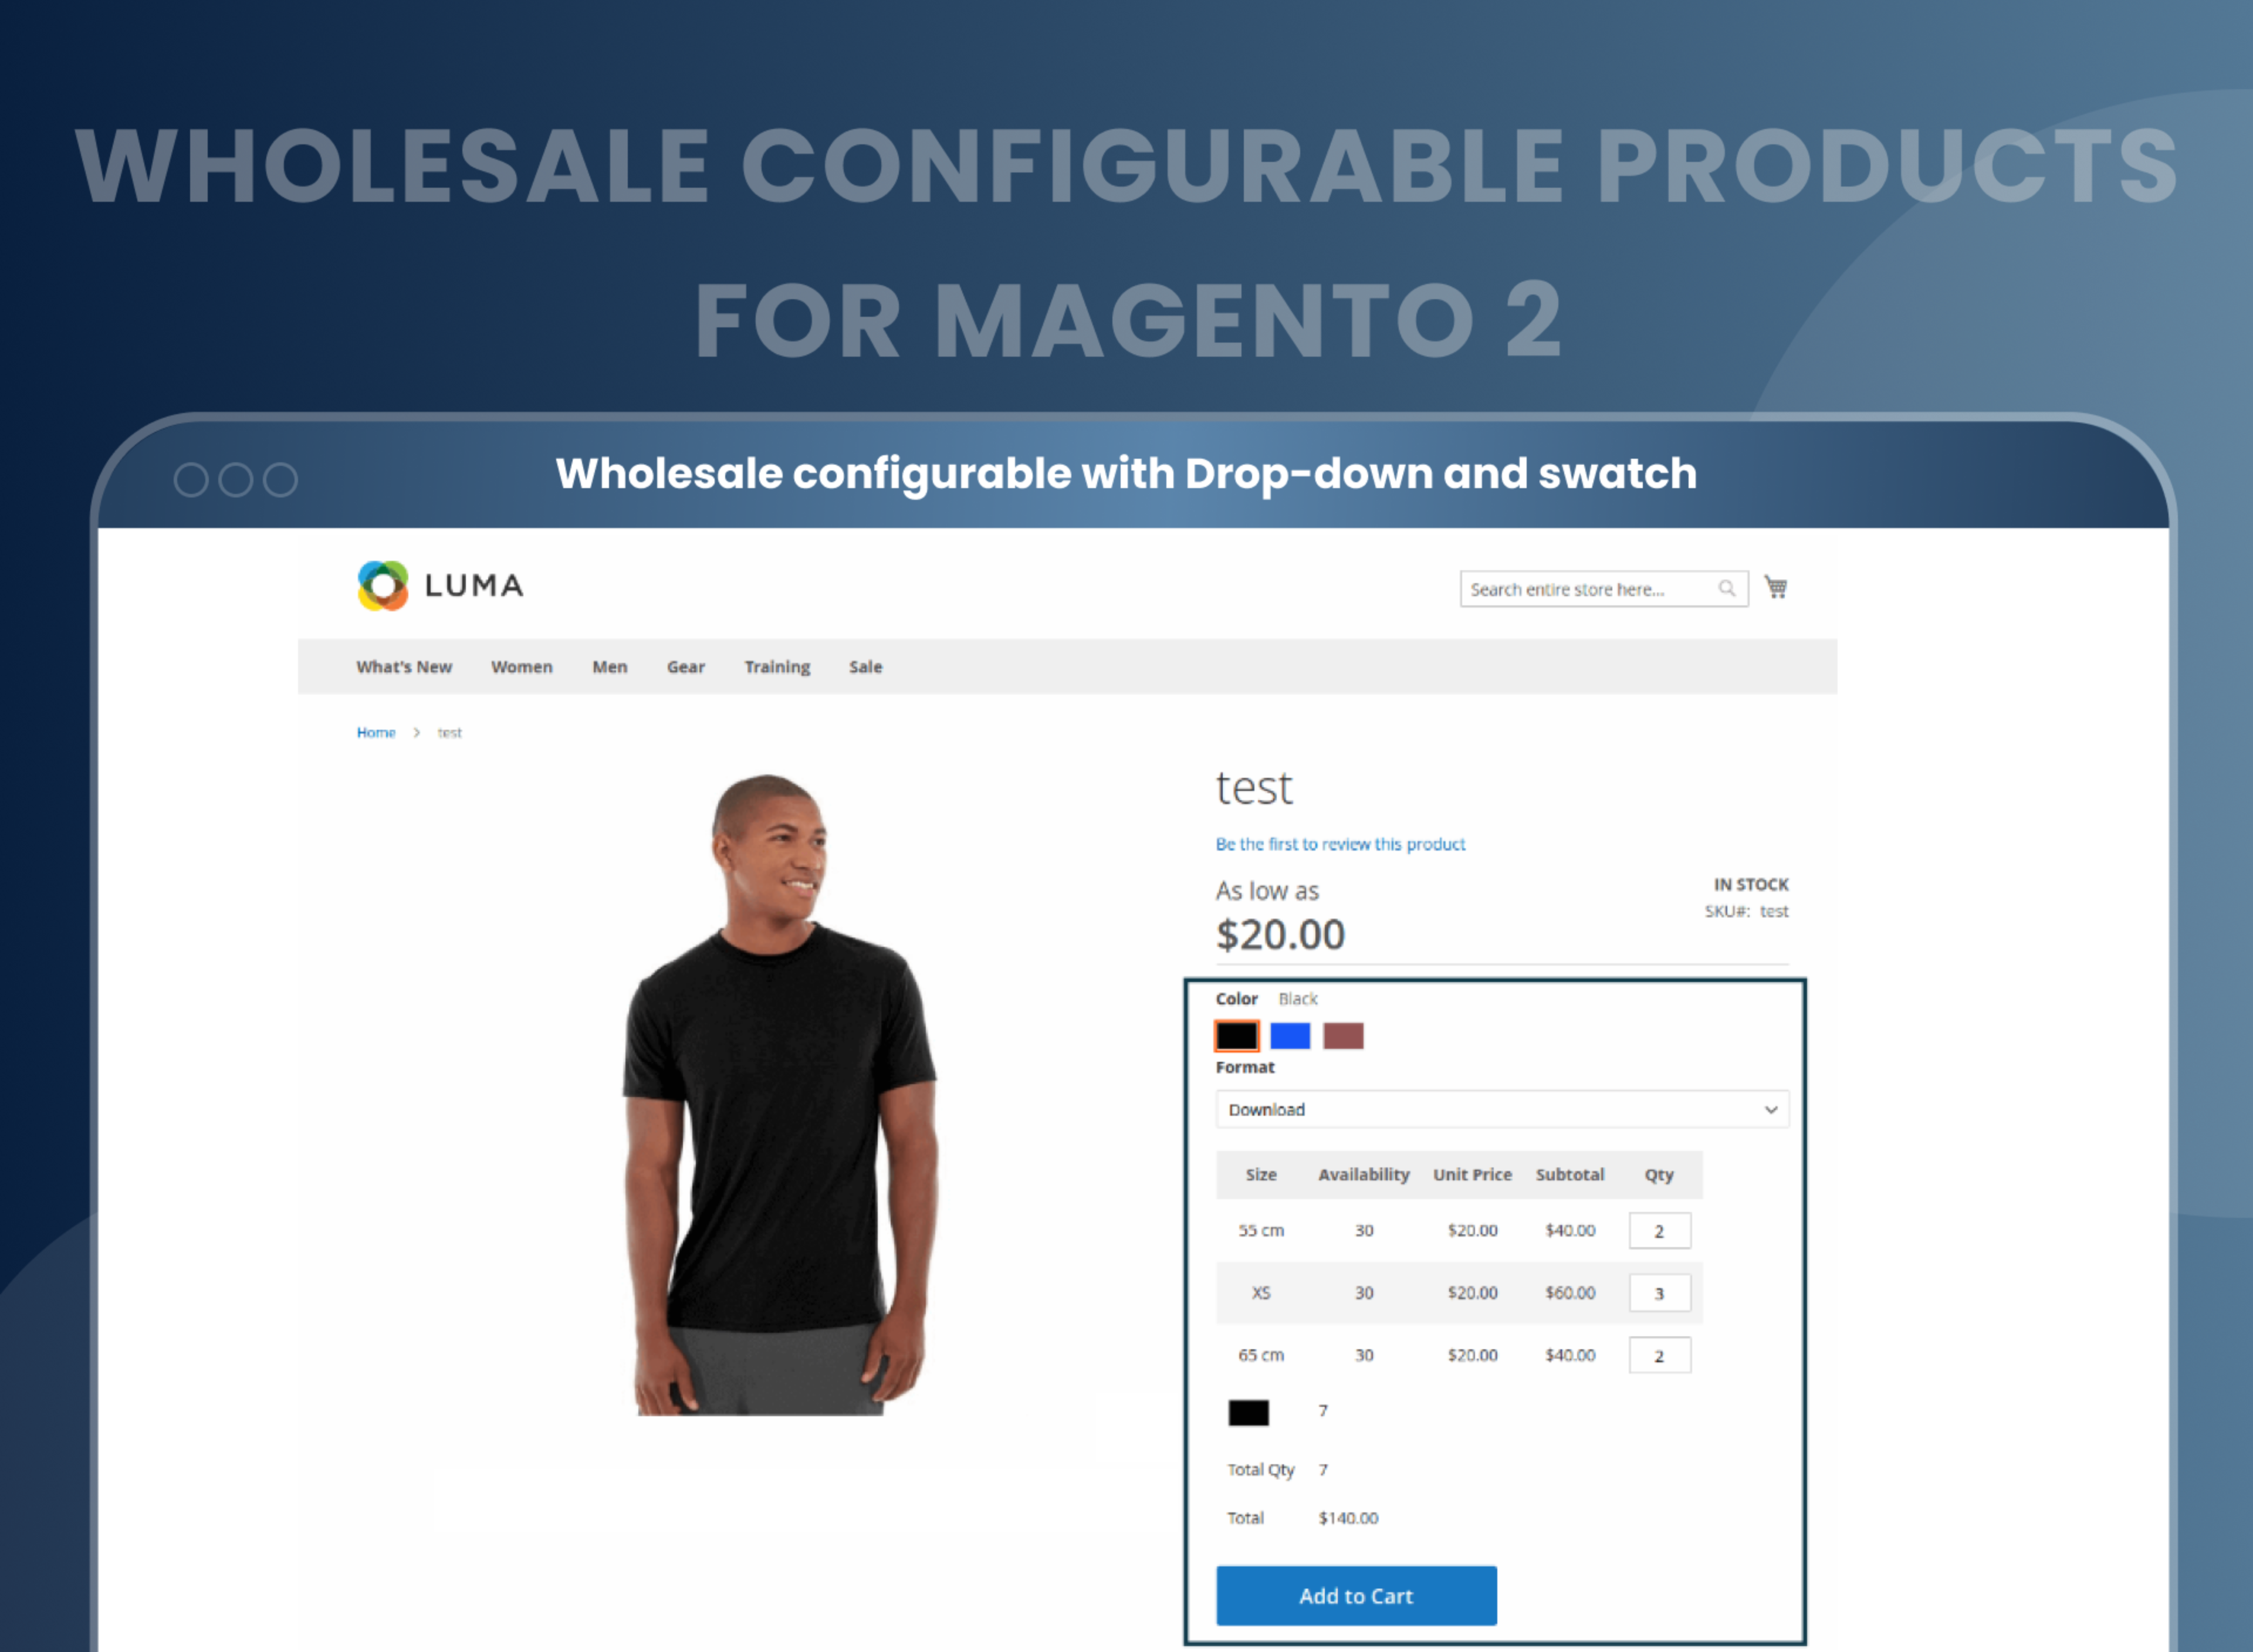 Wholesale configurable with Drop-down and swatch 